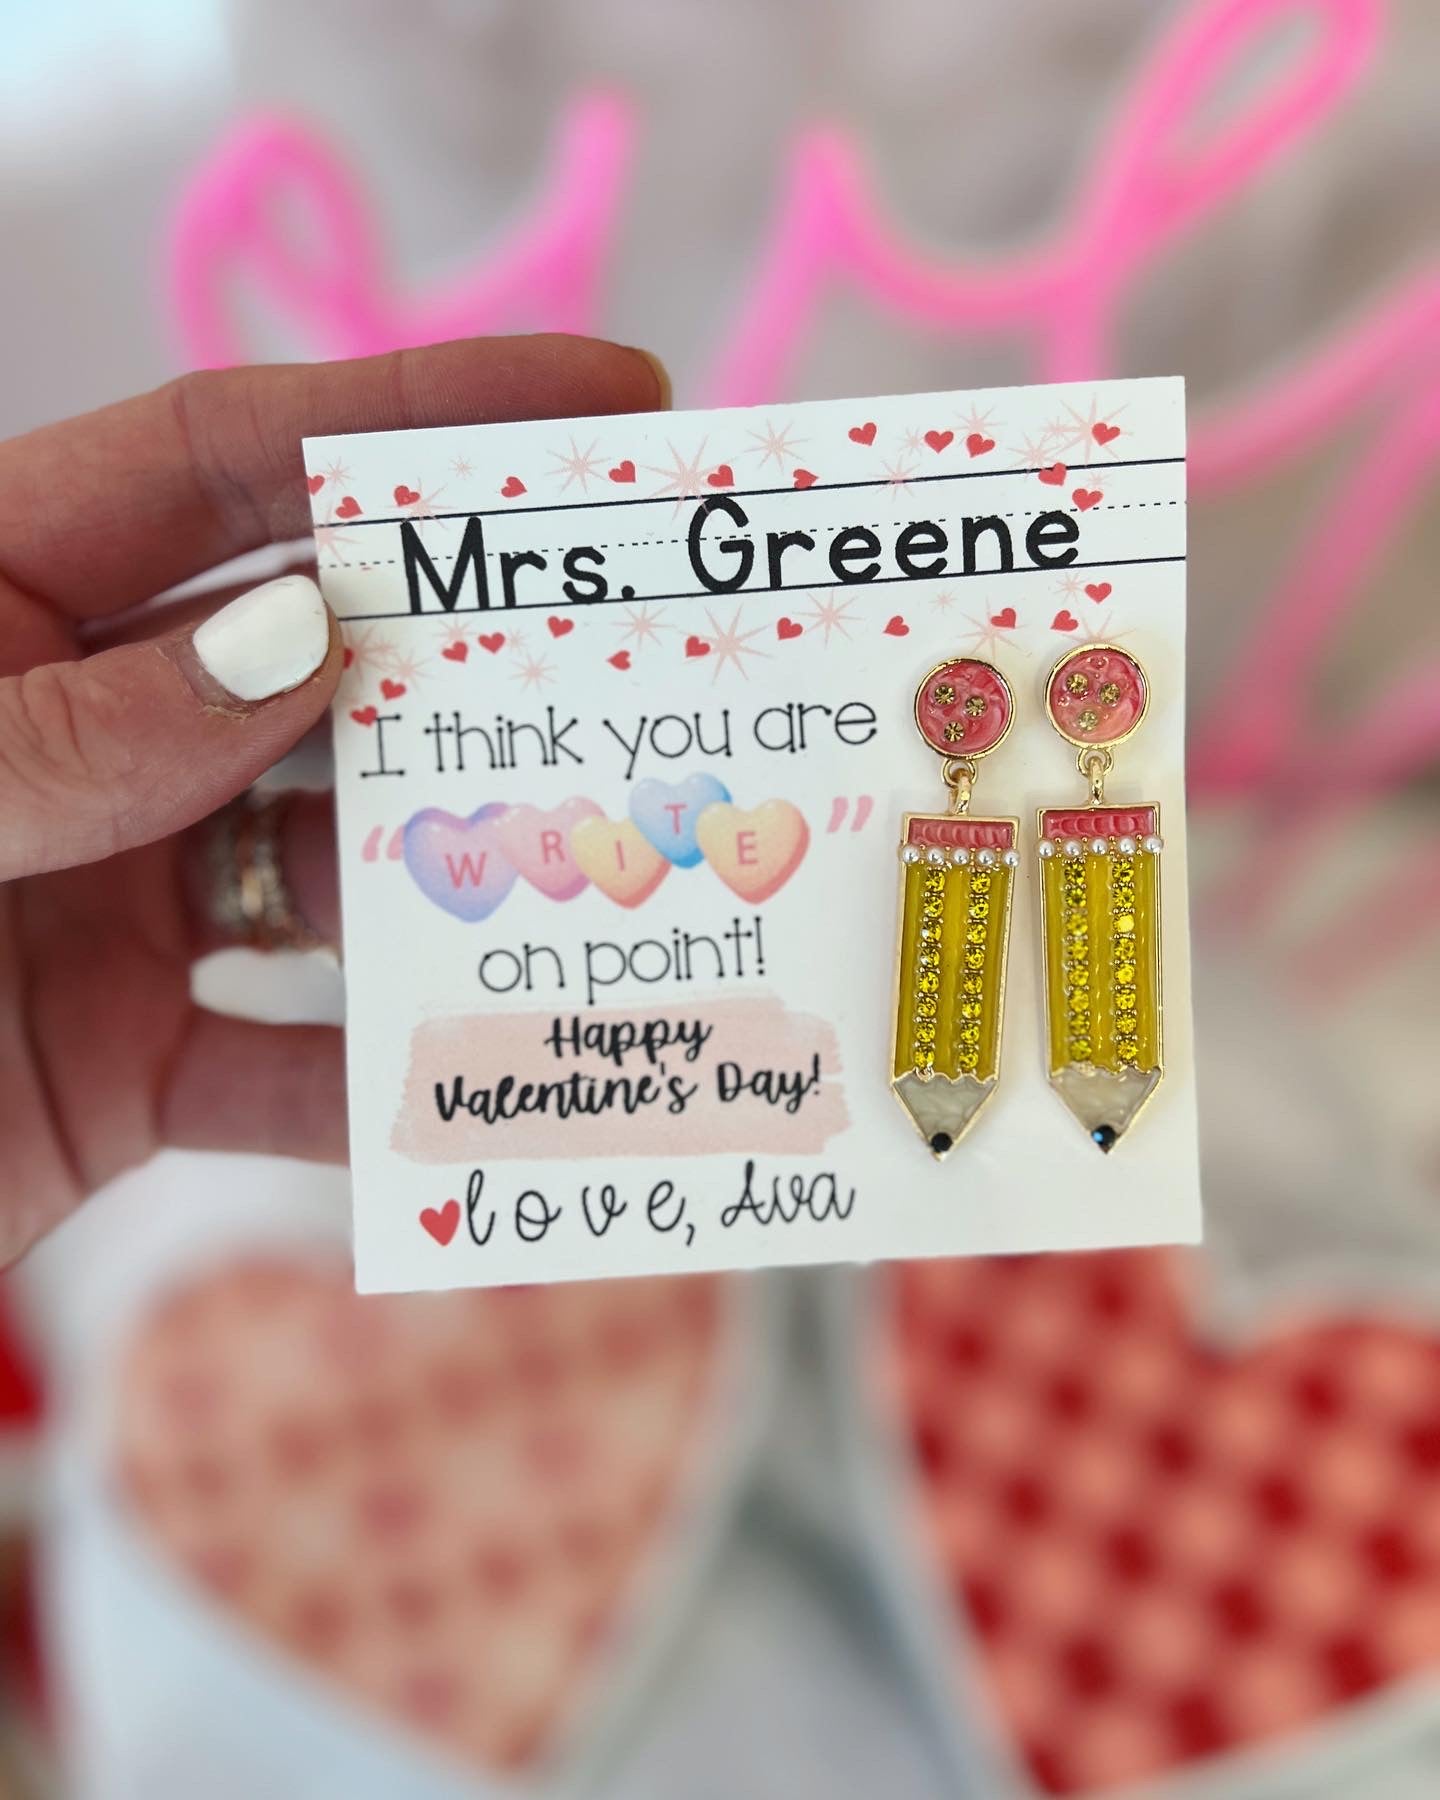 Valentines Day Gifts for Teachers